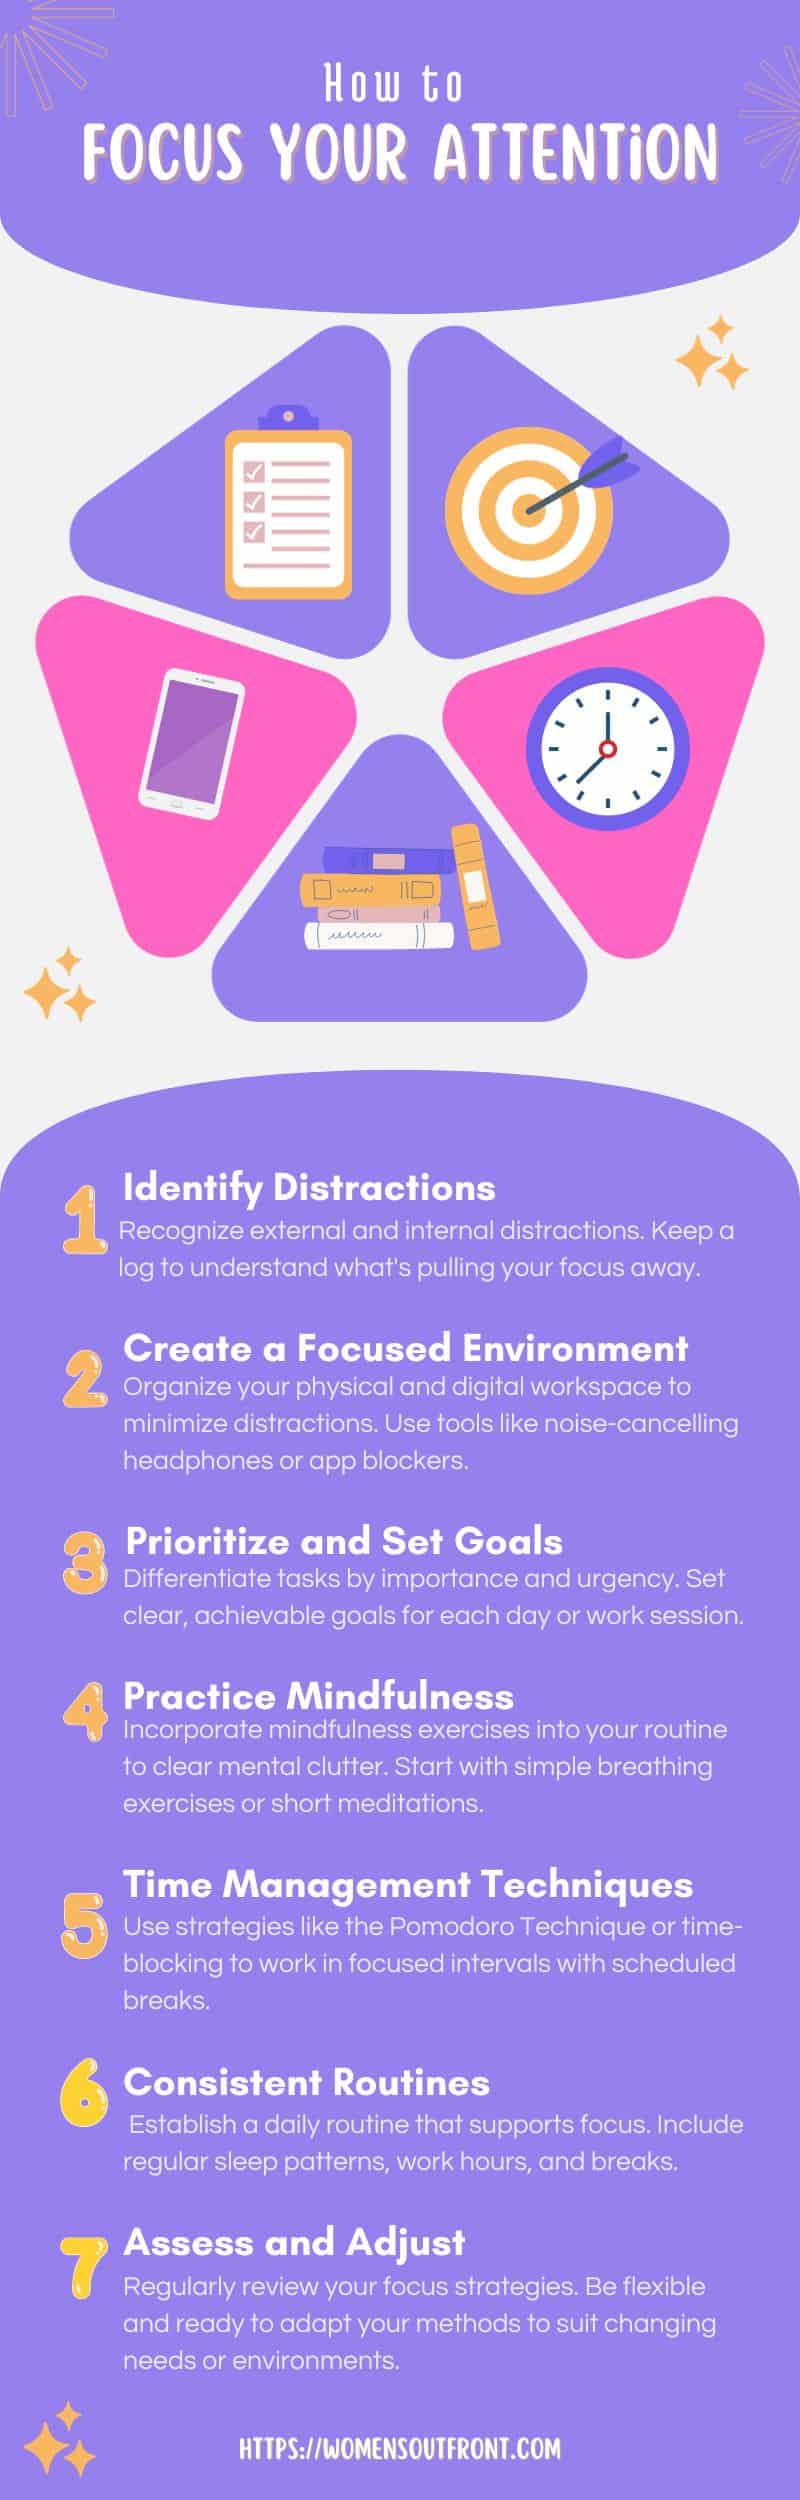 how to focus your attention infographic